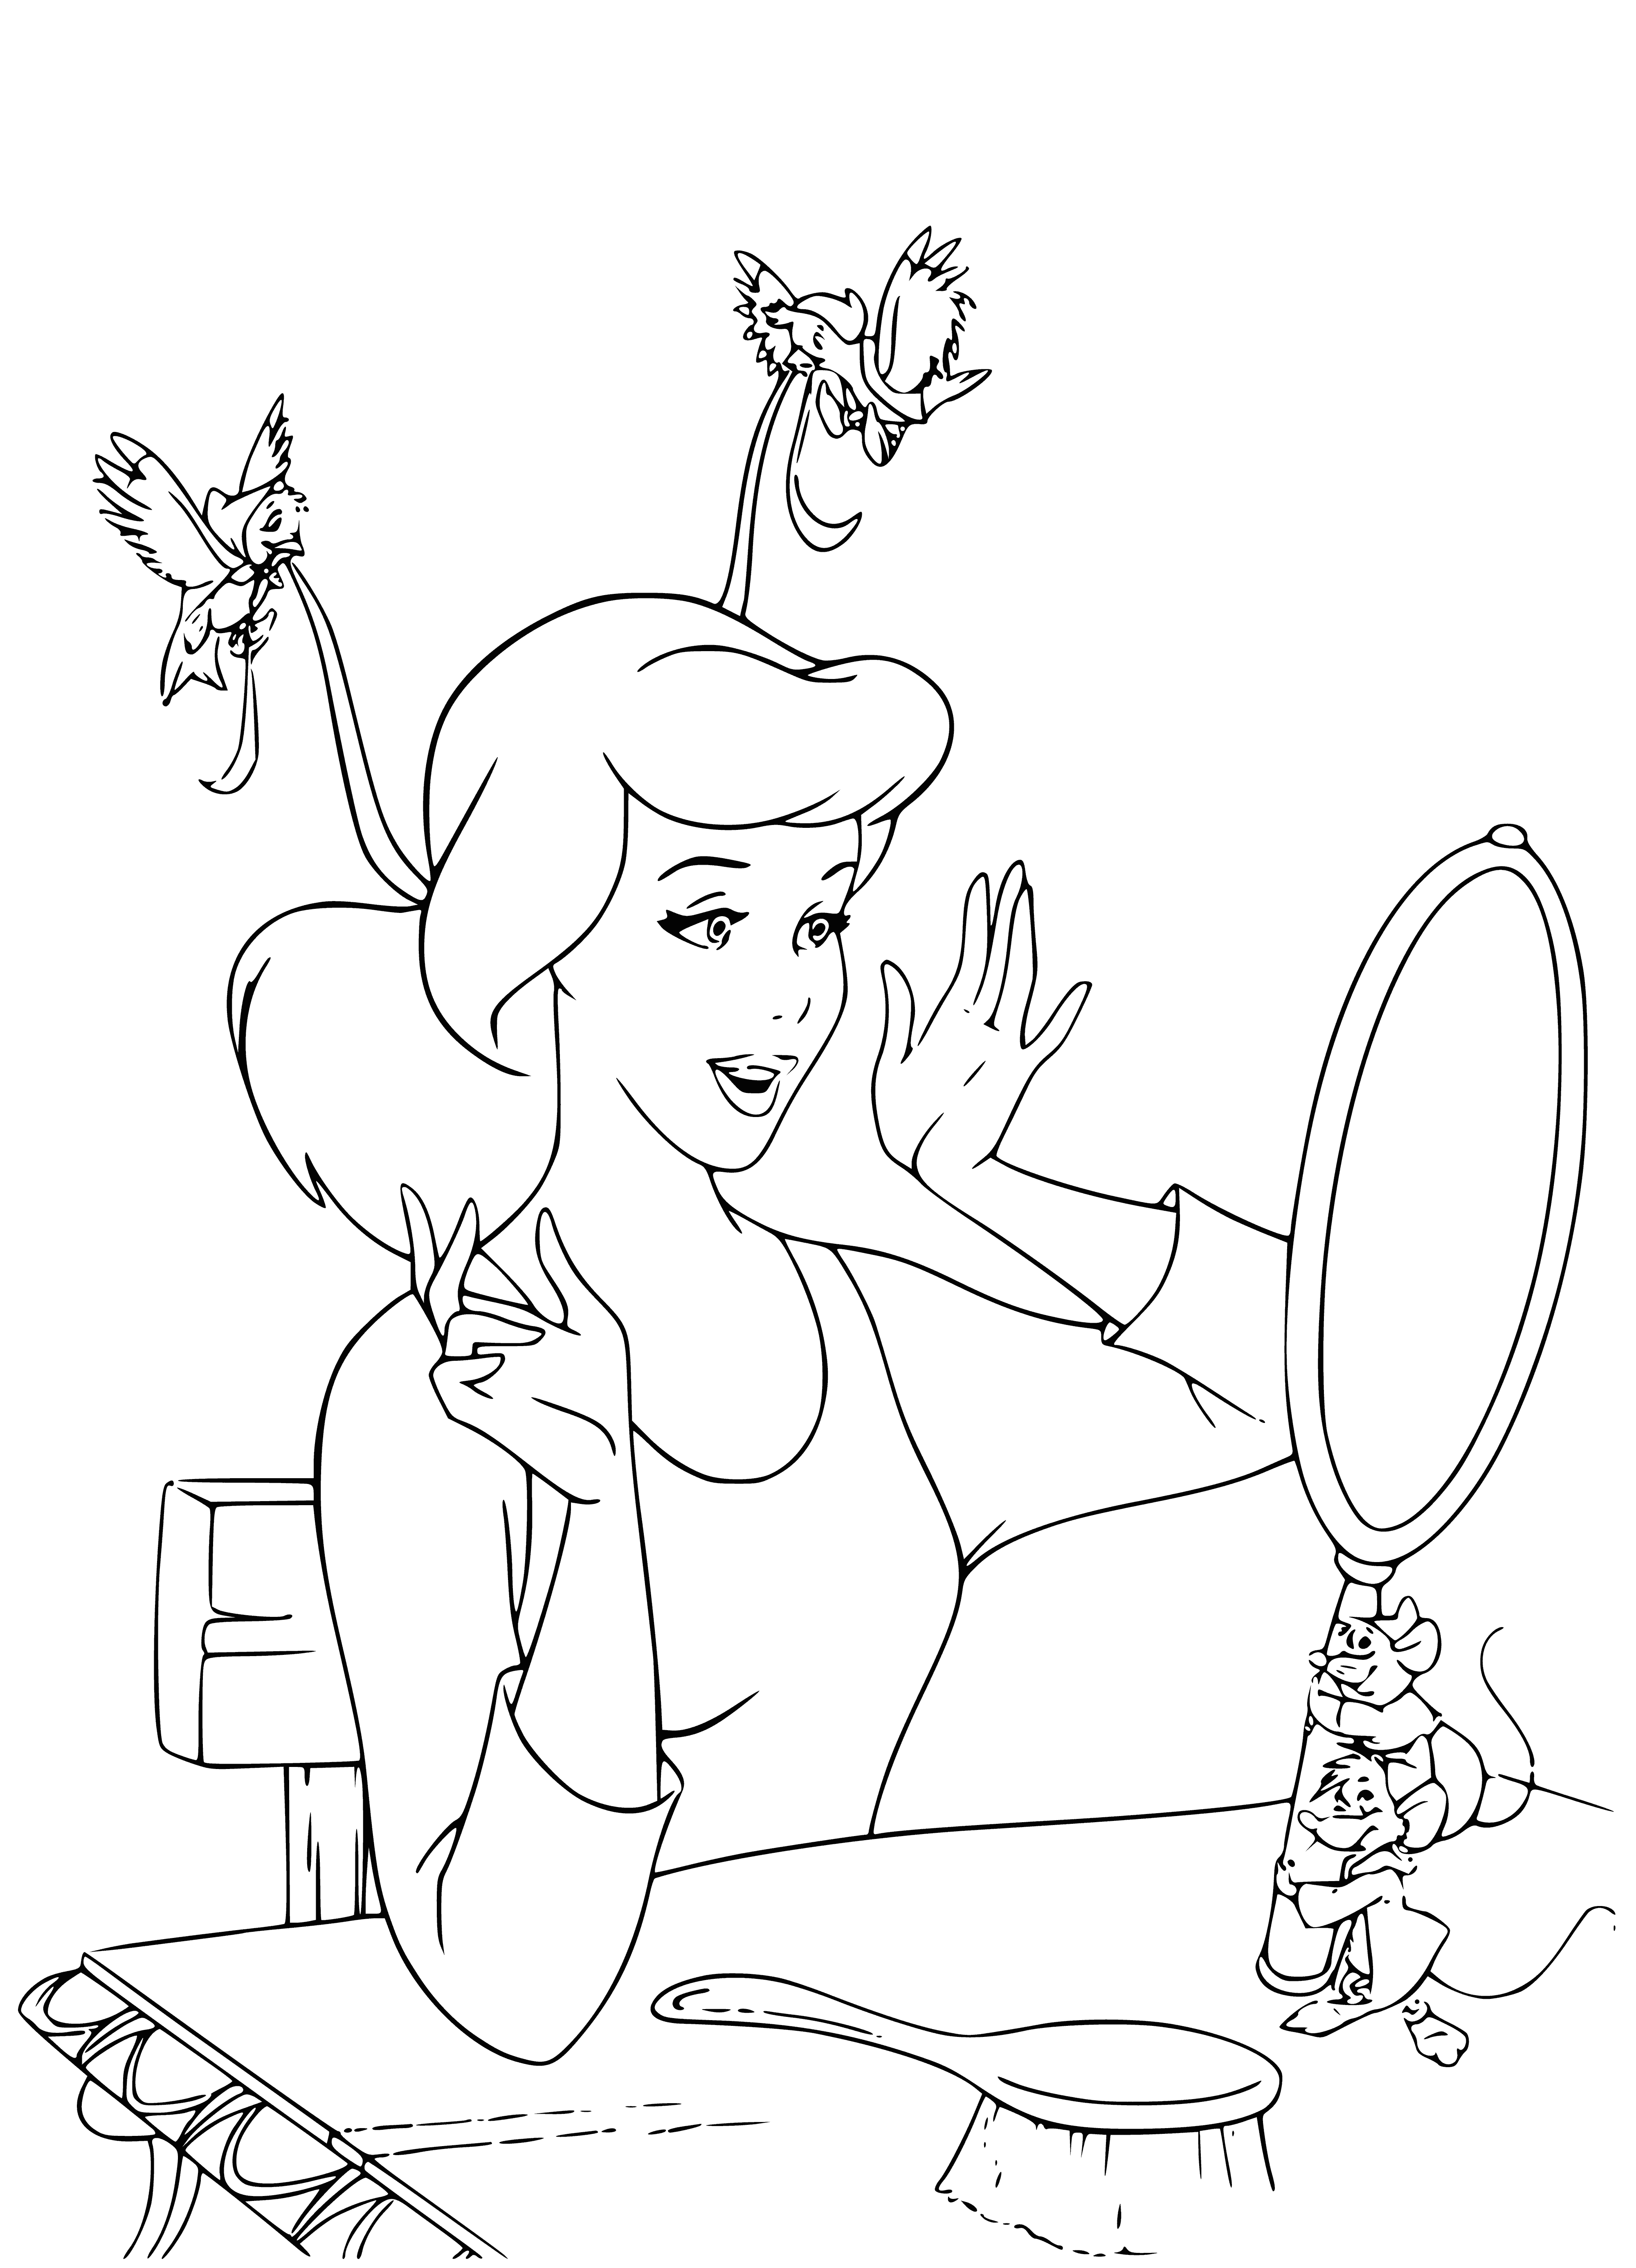 coloring page: -> Cinderella looks elegant and is excited in her dress, with her hair in an updo, in front of a mirror.